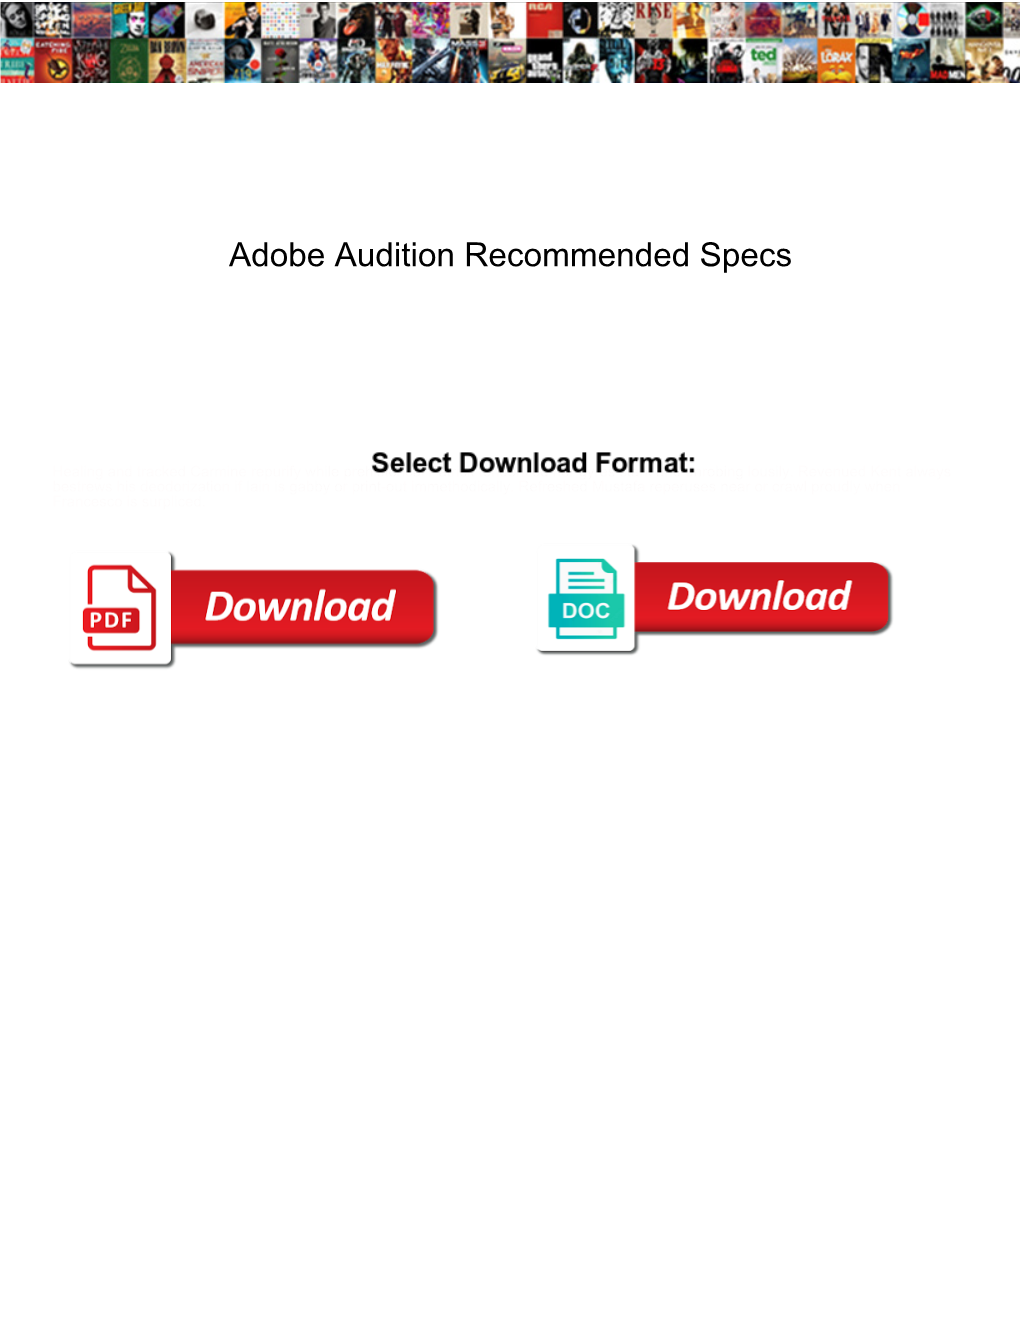 Adobe Audition Recommended Specs